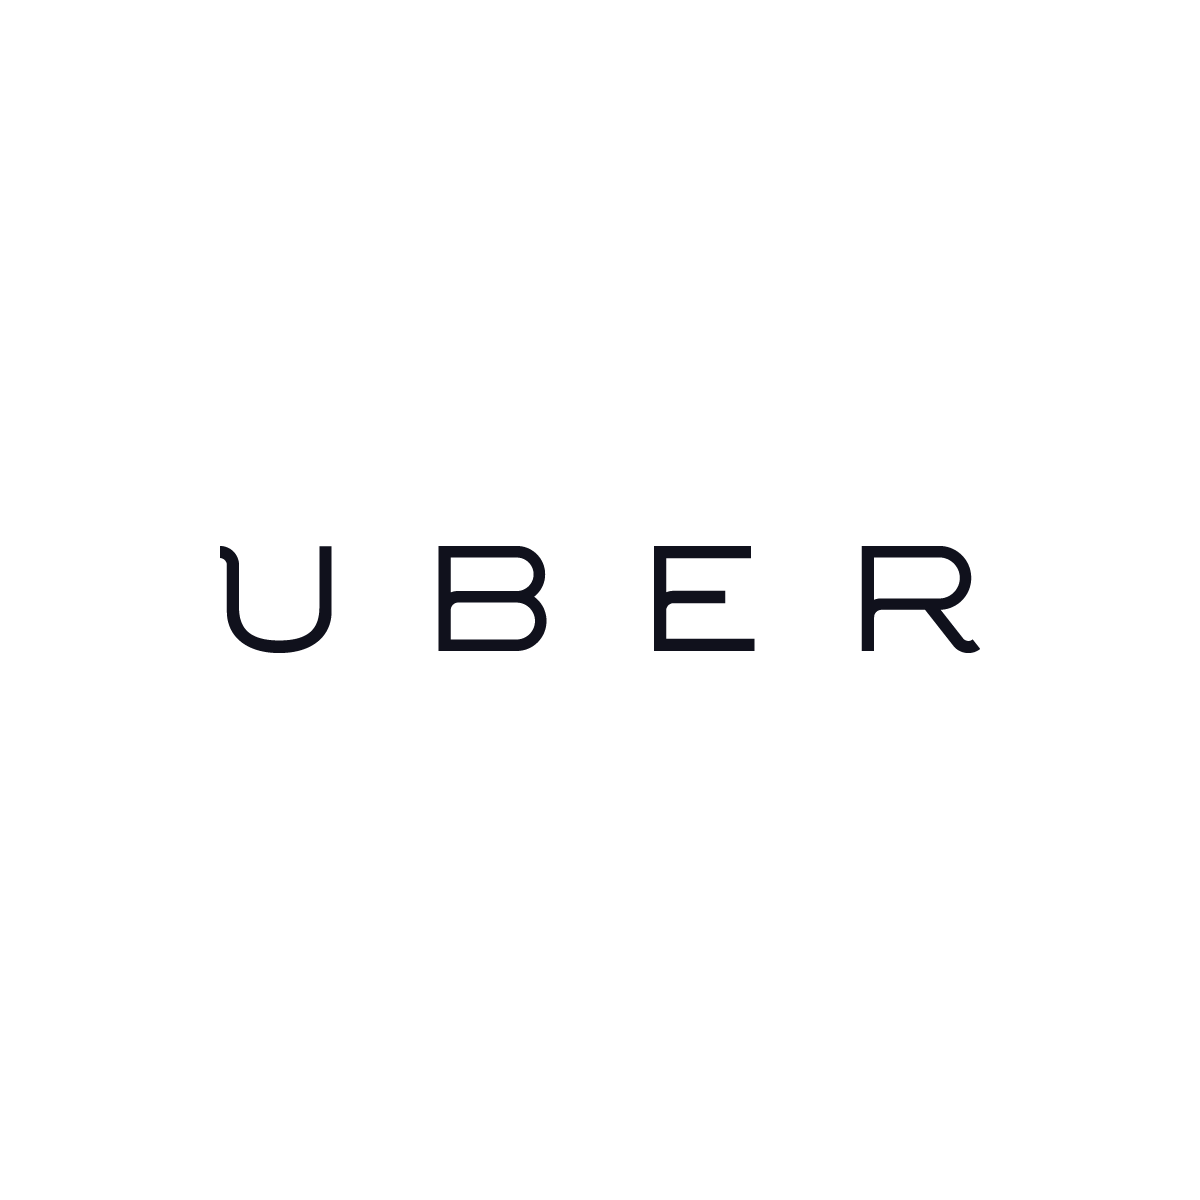 Uber Promo Code For $5 Off First 3 Rides